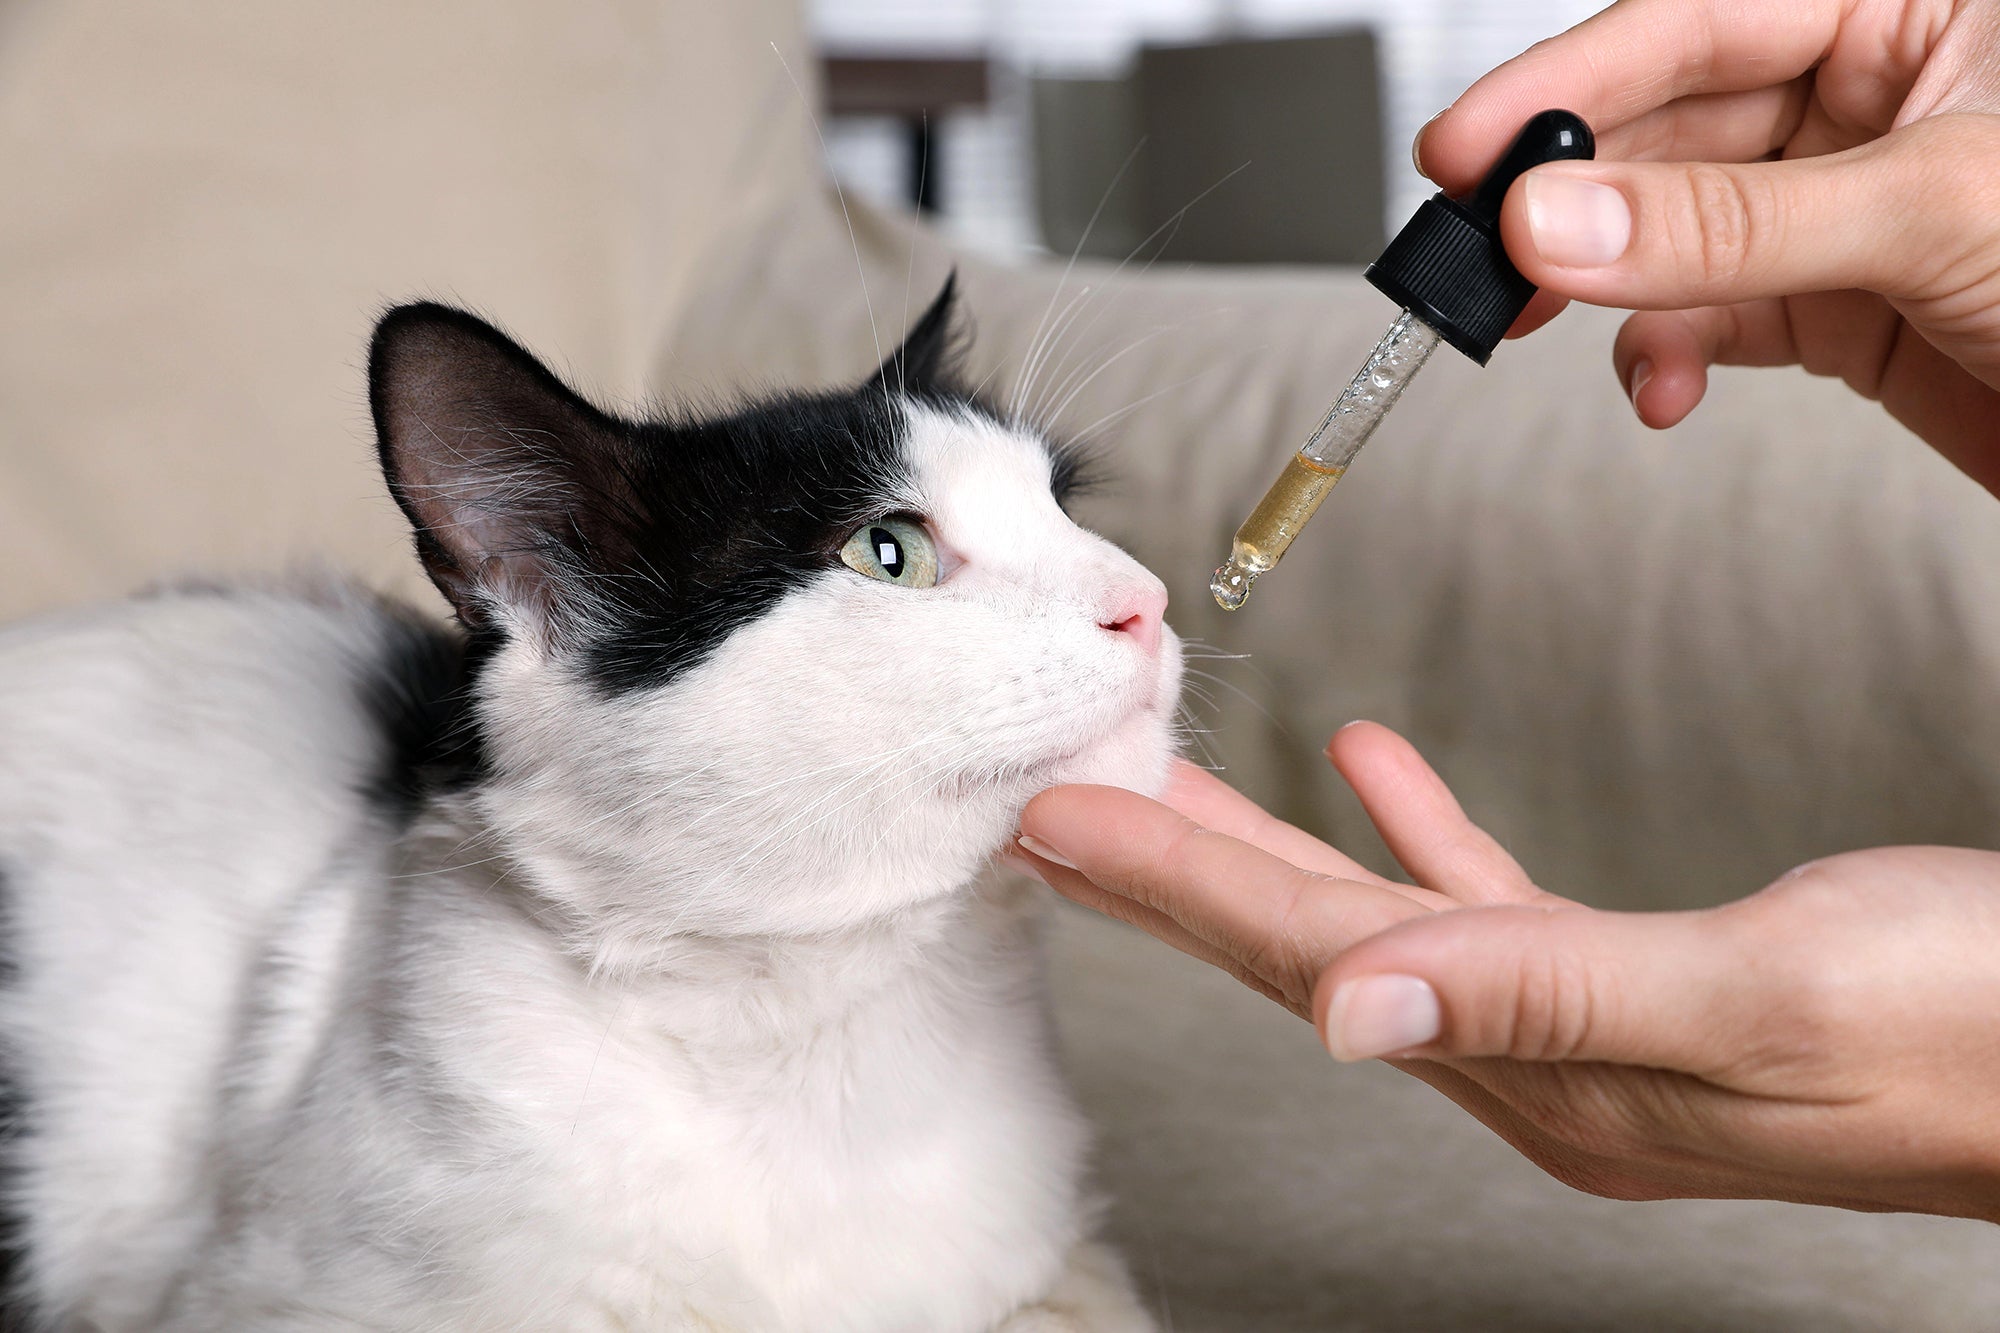 Woman giving tincture to cat at home with a liquid dropper, closeup